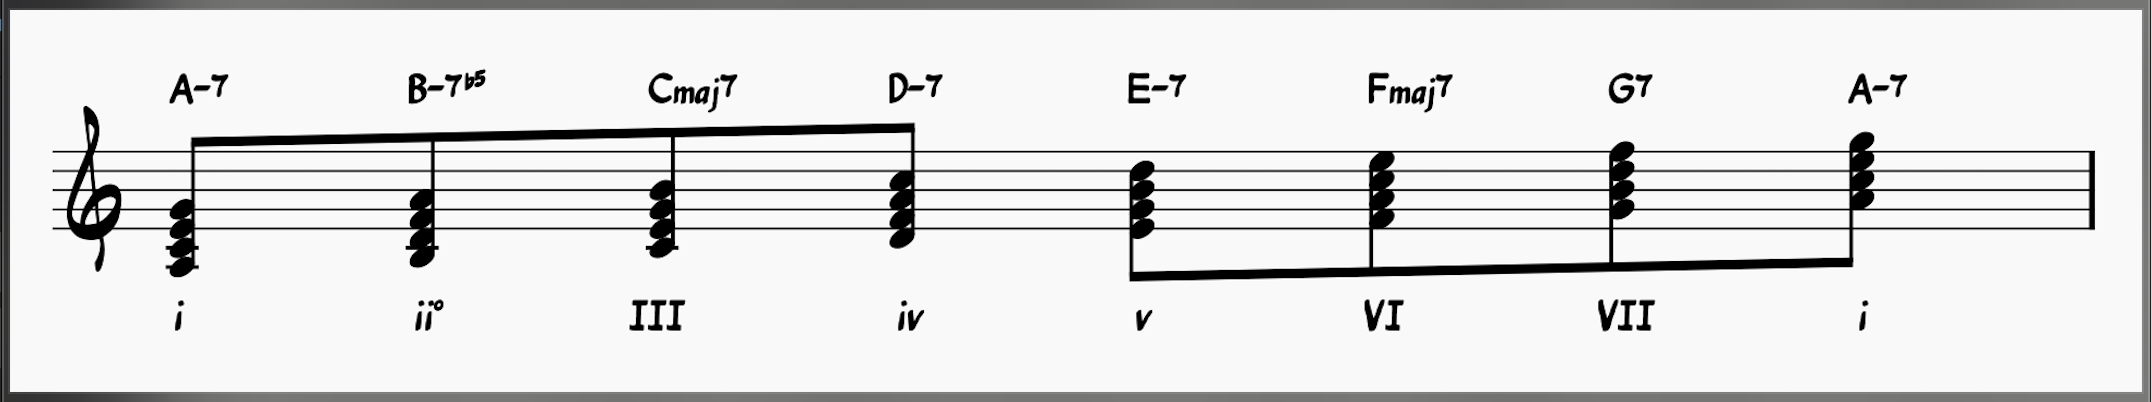 Chords in the Key of A minor 